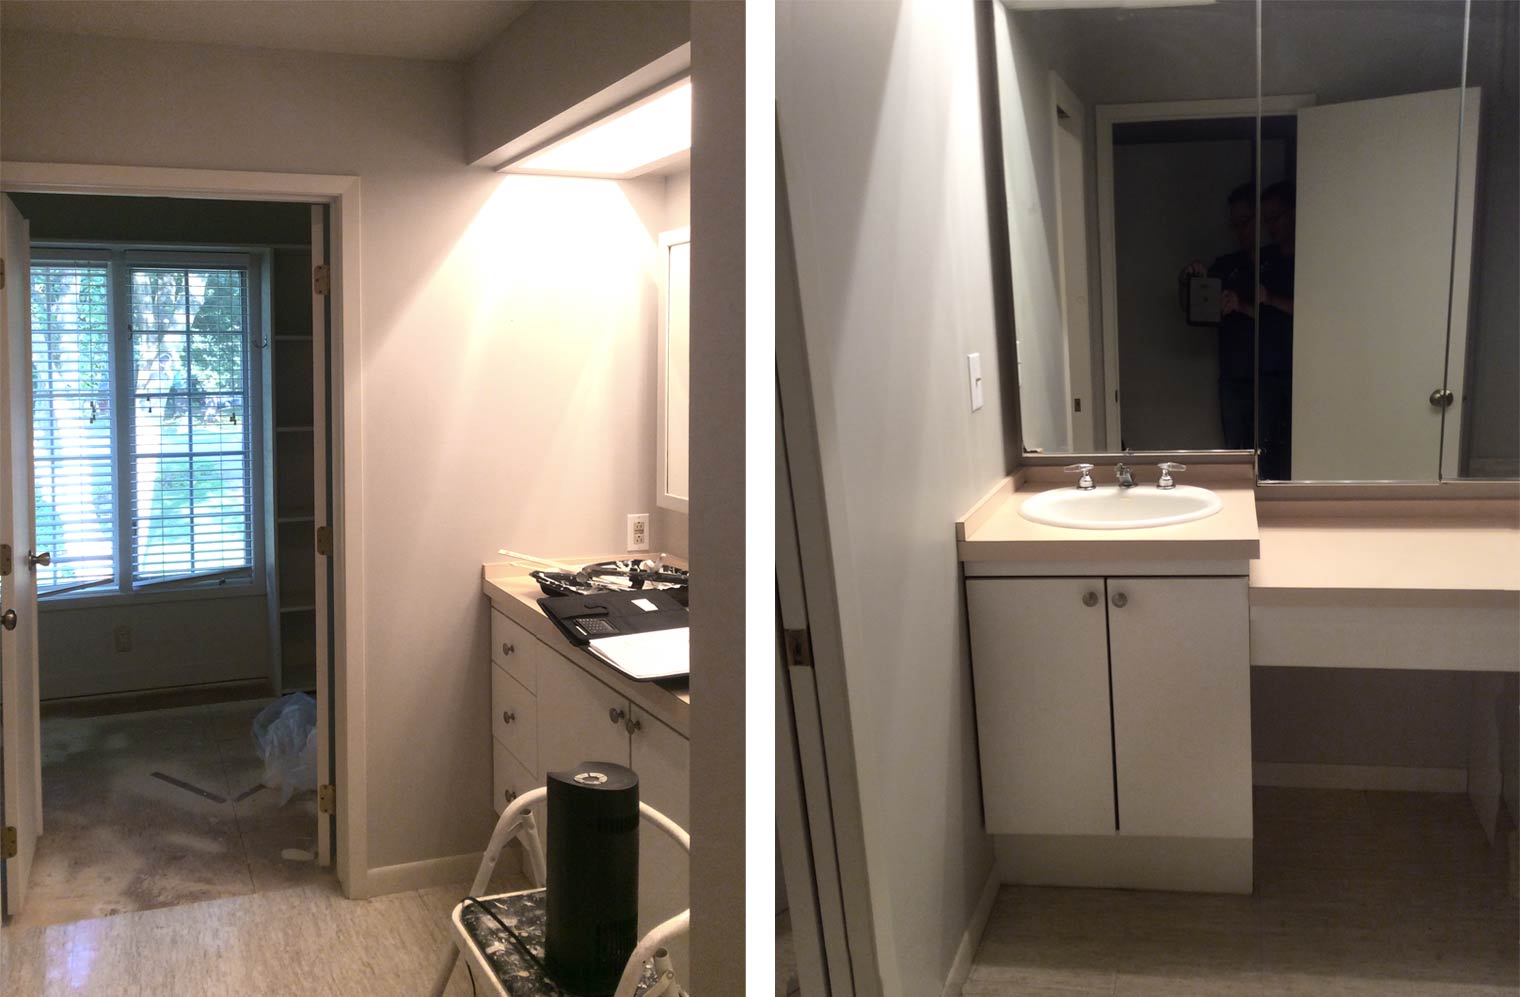 before photos of outdated cramped master bathroom